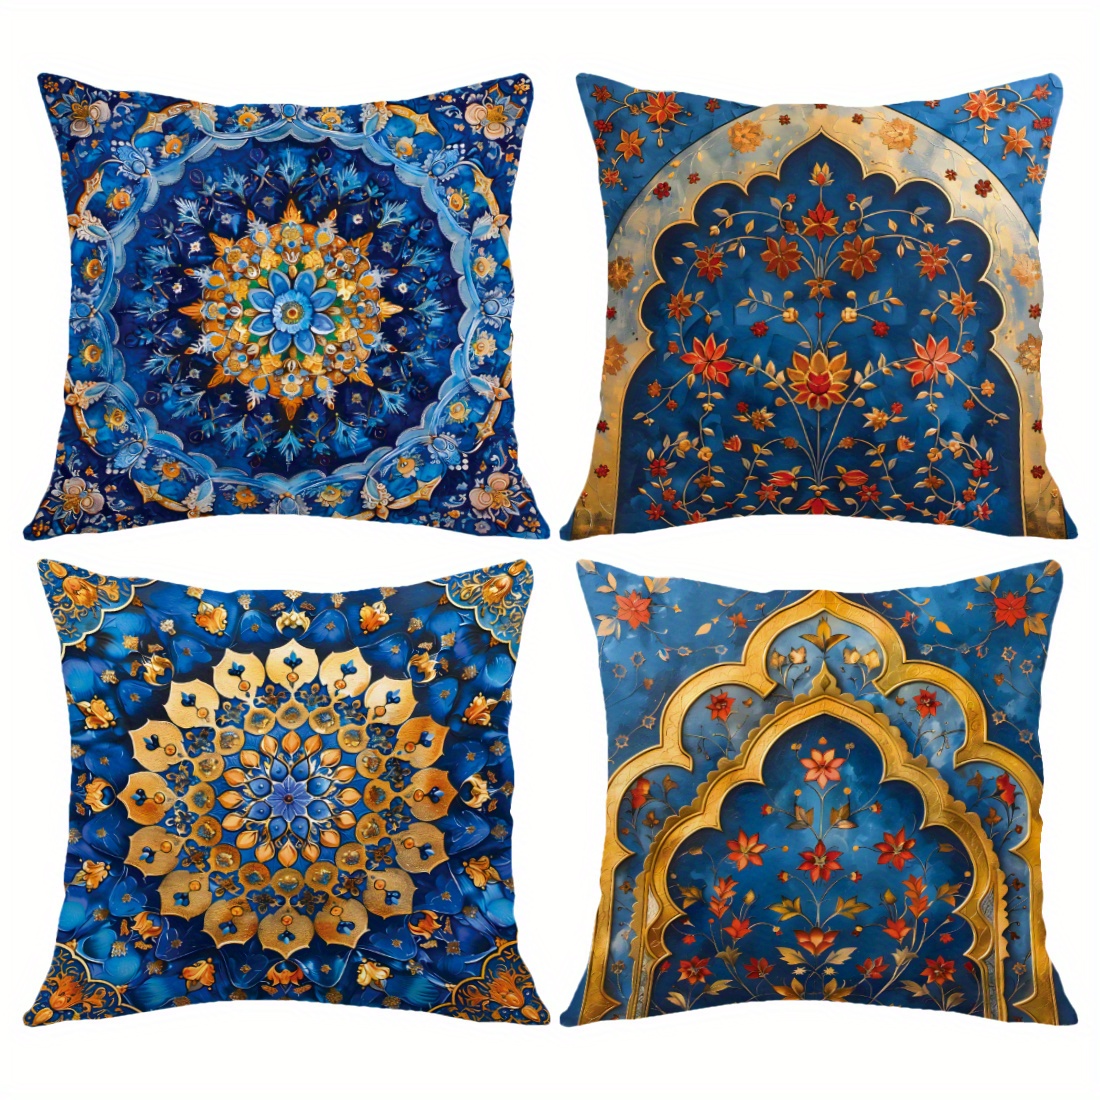 

1pc Ethnic Style Blue Gold Mandala Peach Fleece Throw Pillow Cover, Home Comfortable Decorative Pillow Cover, Cushion Cover For Living Room Bedroom Sofa